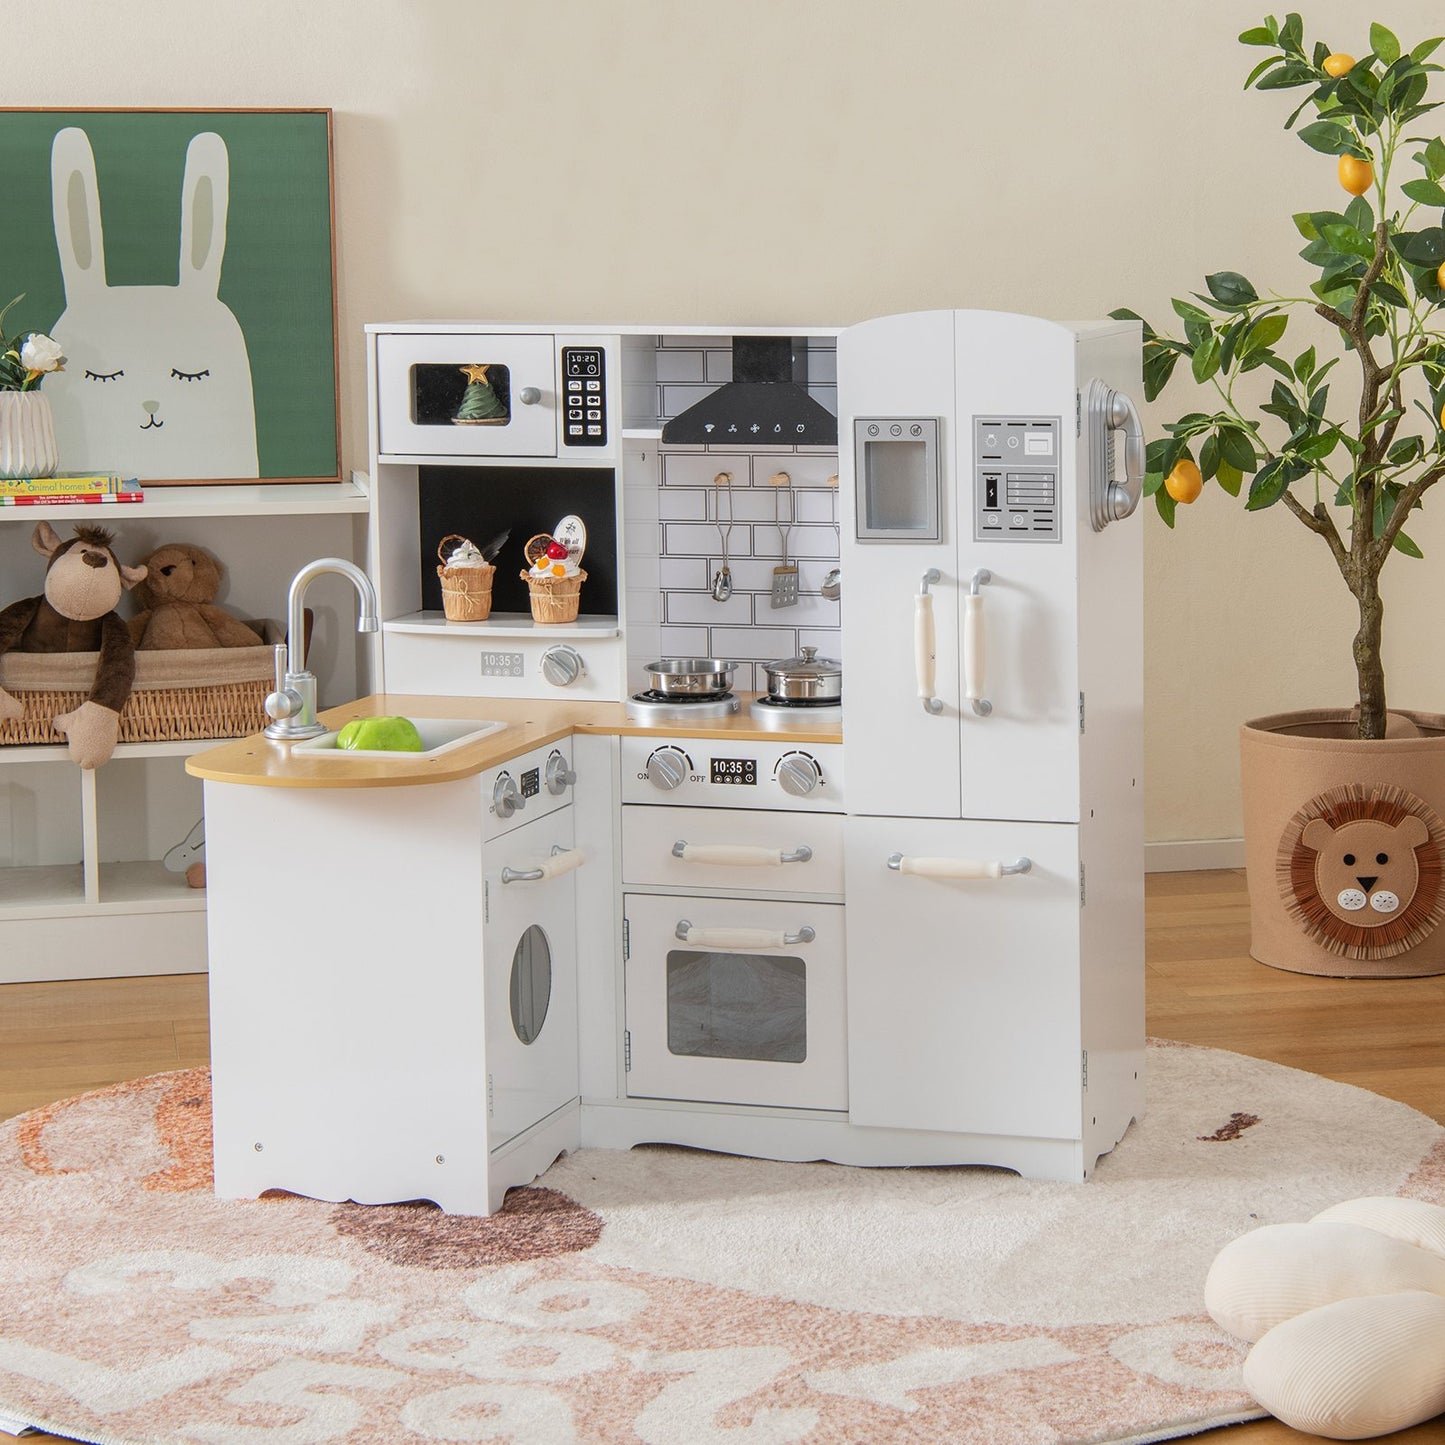 Wooden Kid's Corner Kitchen Playset with Stove for Toddlers, White